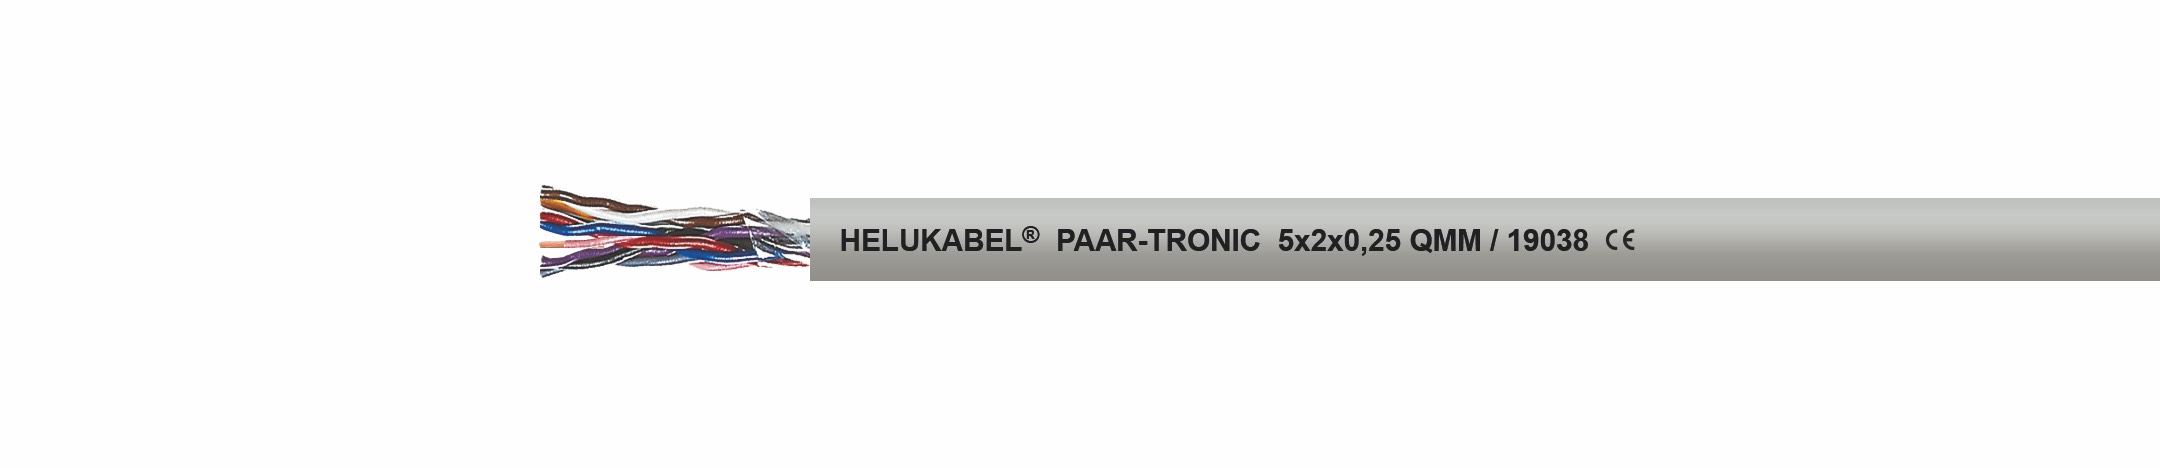 Cable Helukabel: PAAR-TRONIC